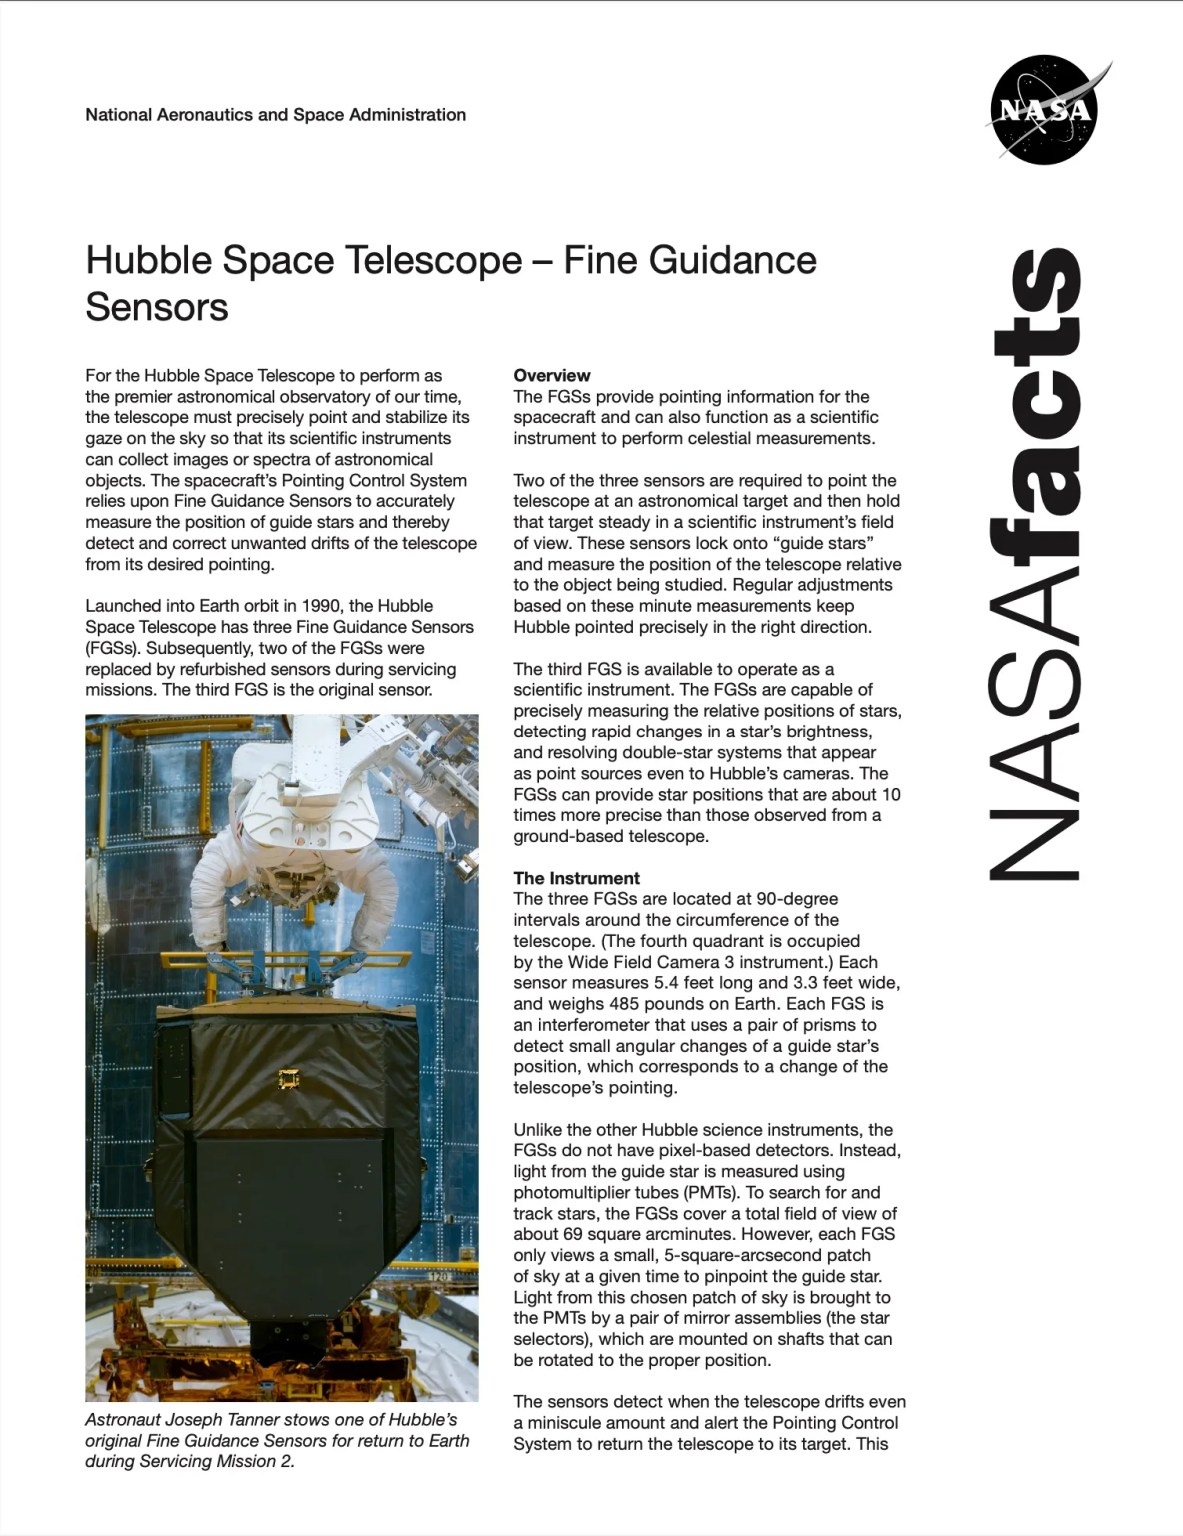 The front of a standard NASA fact sheet that focuses on Hubble's fine guidance sensors.